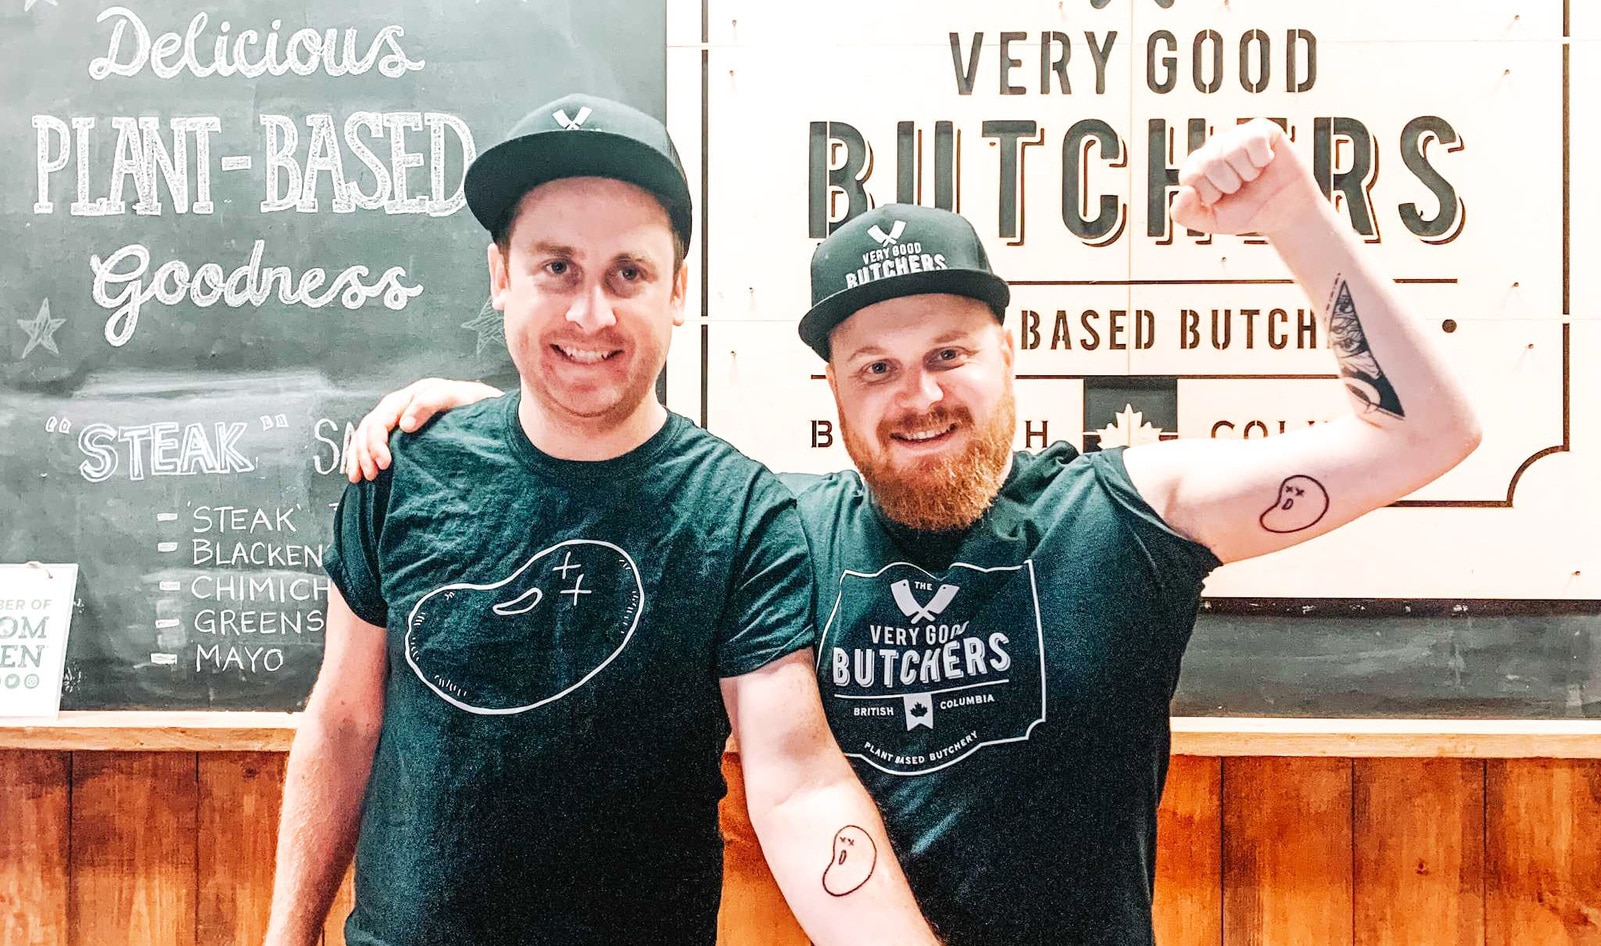 Vegan Butcher Shop’s Sales Spike by Nearly 600 Percent